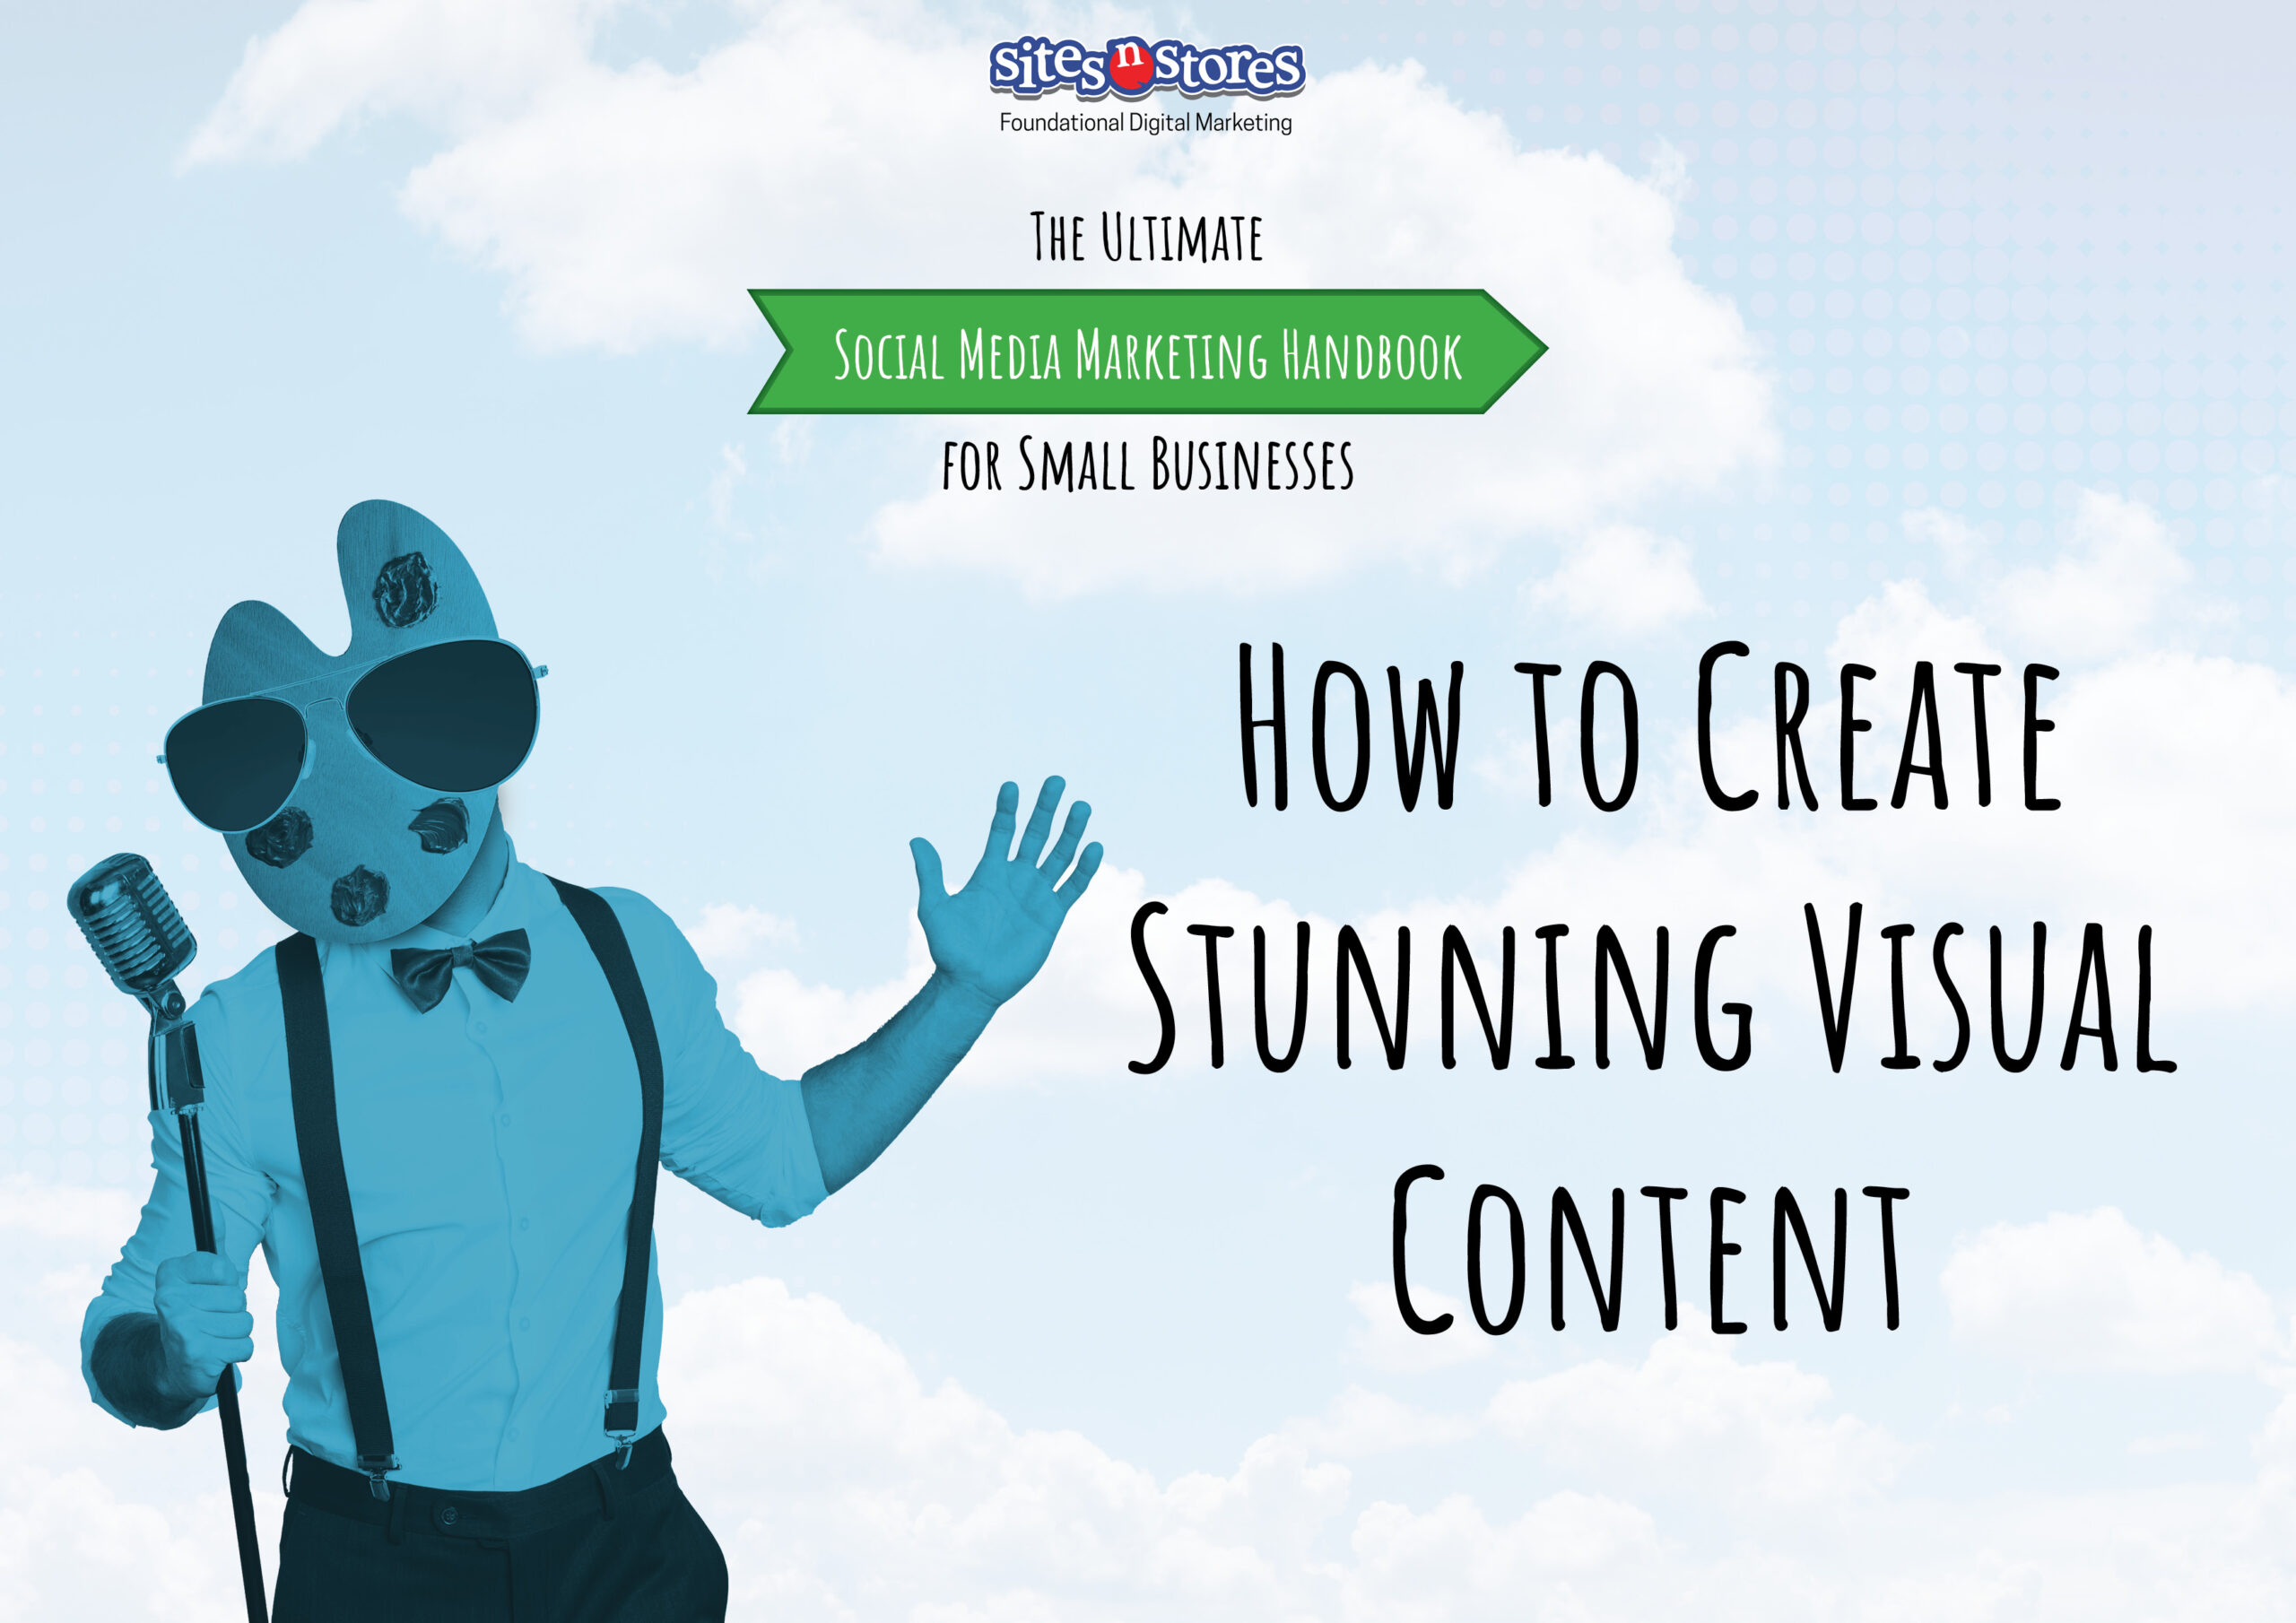 How to Create Stunning Visual Content